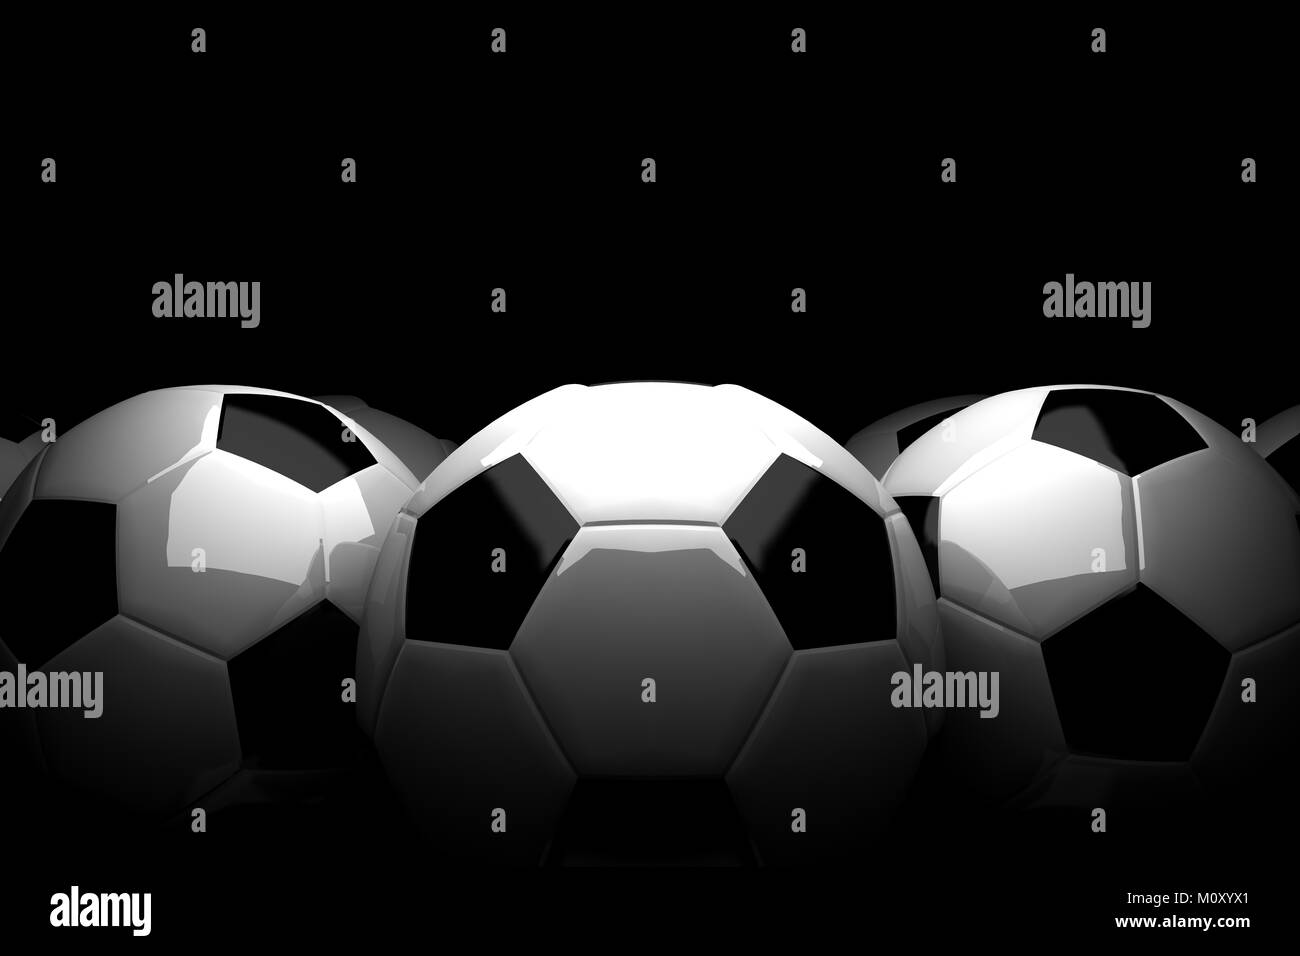 classic soccer balls made of white and black leather. Grouped with dim light on dark background Stock Photo